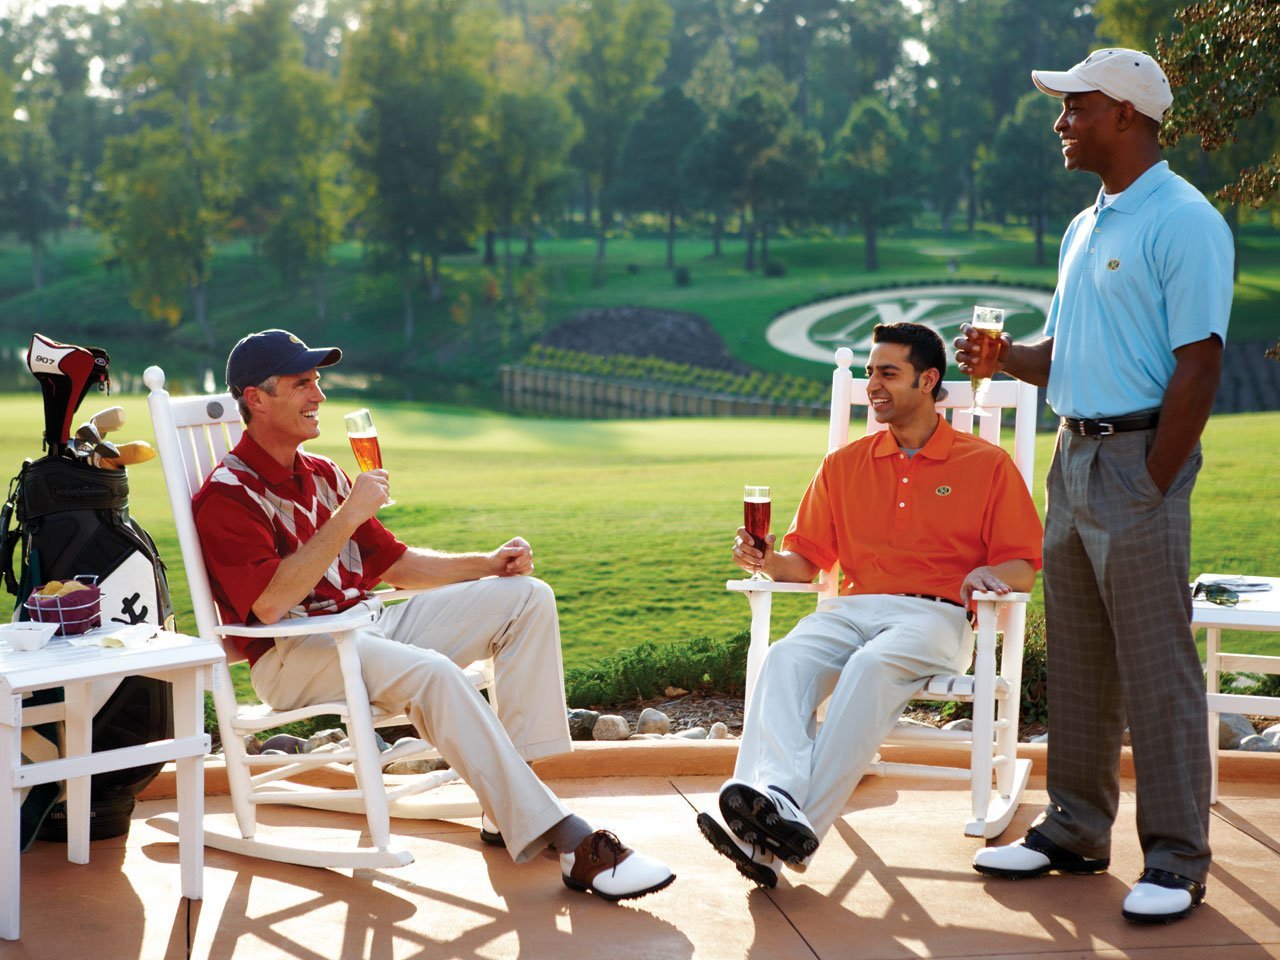 Golfers relaxing with beer